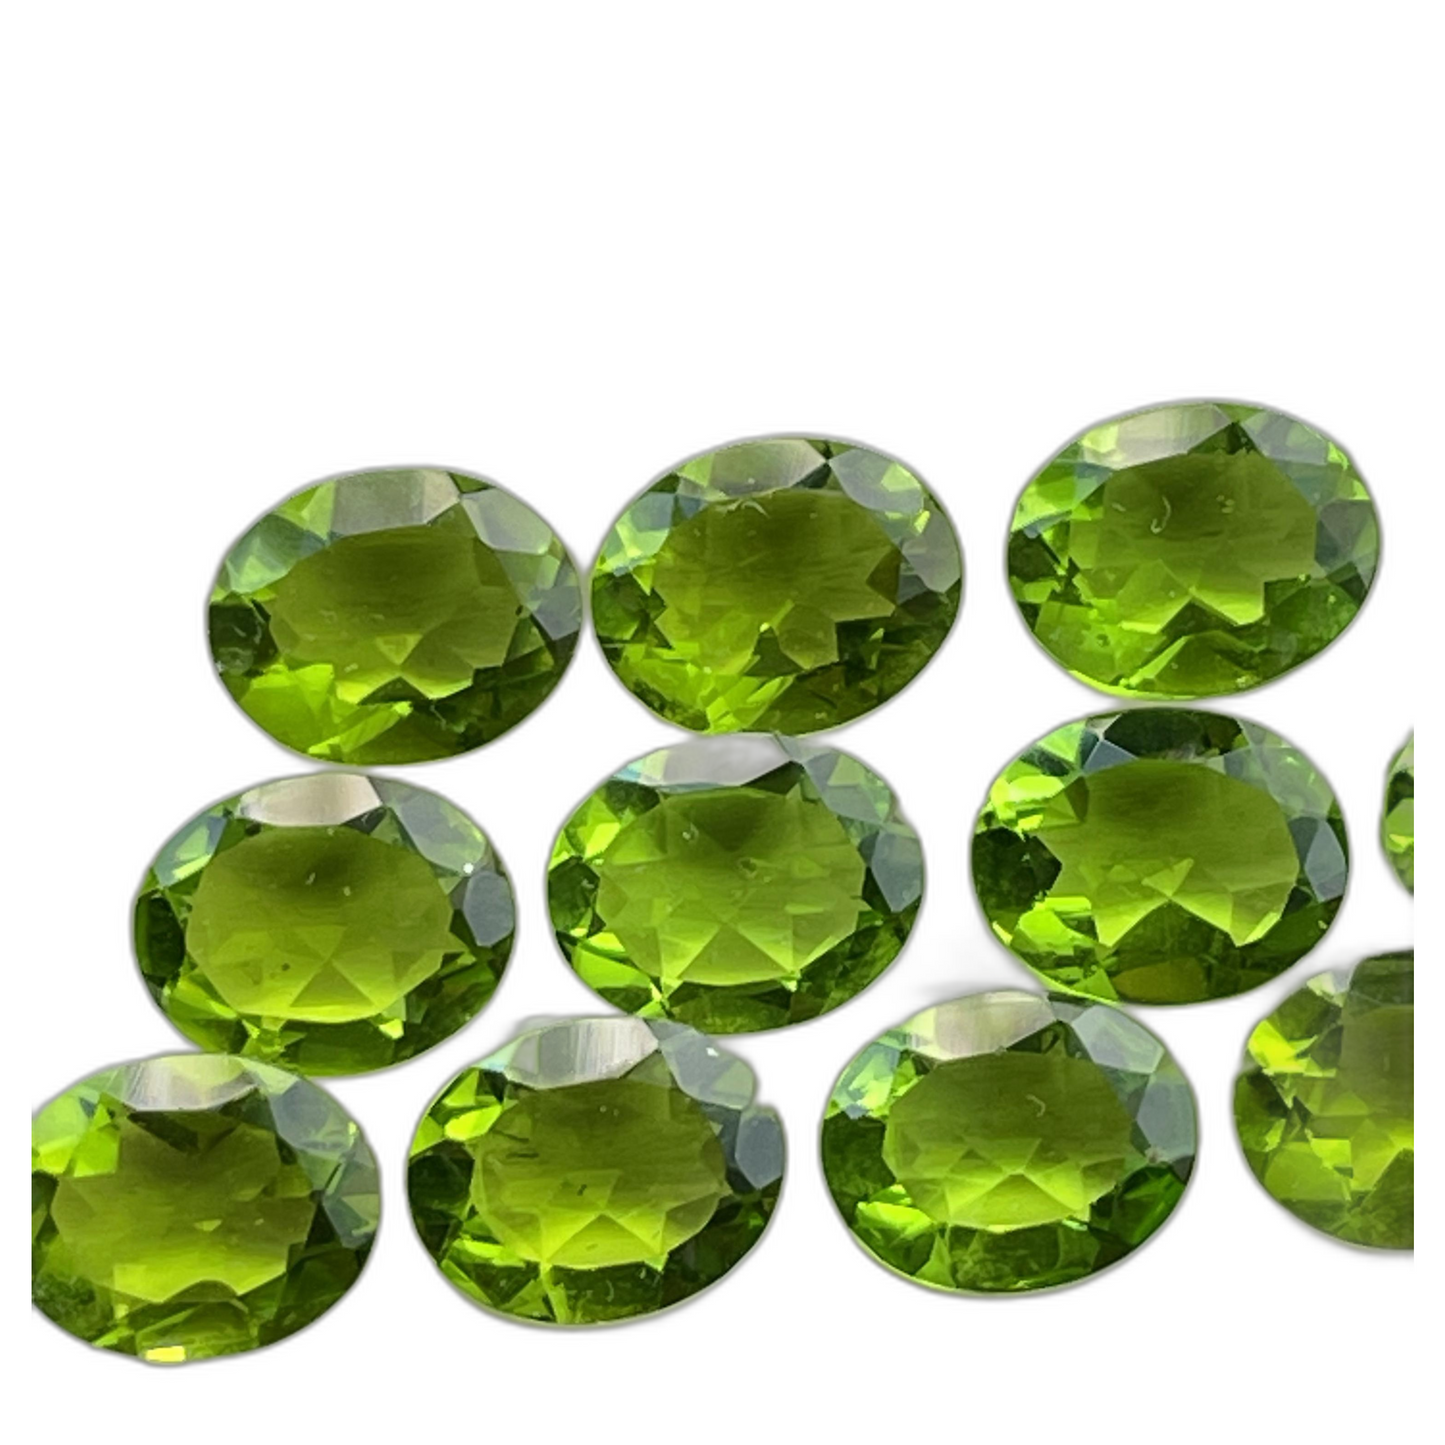 Peridot Faceted Nice Quality (8-10 mm) Oval Shape